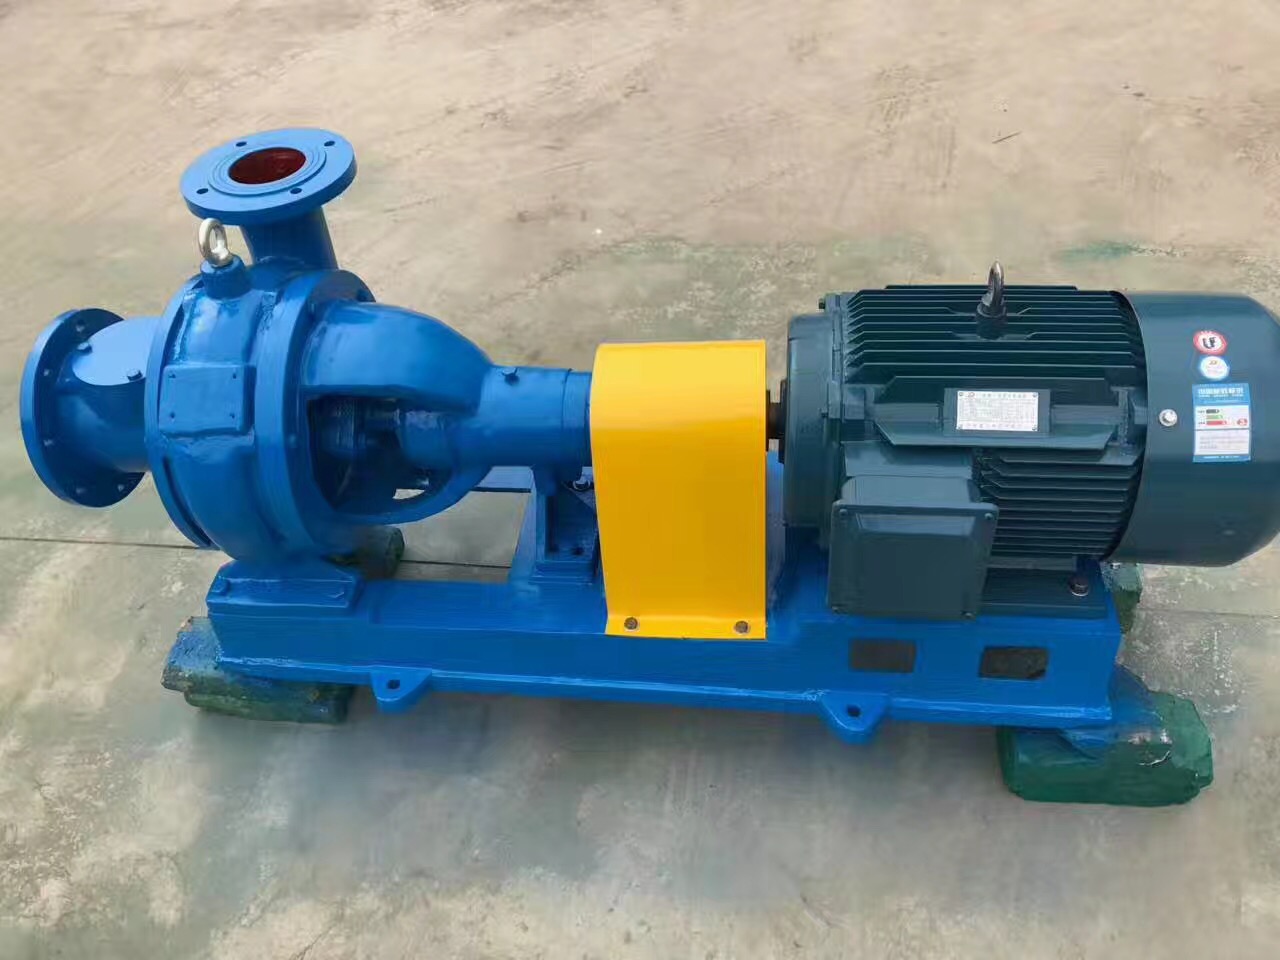 Shipping! Mult-capacity slurry pump is ready to ship to Peru.